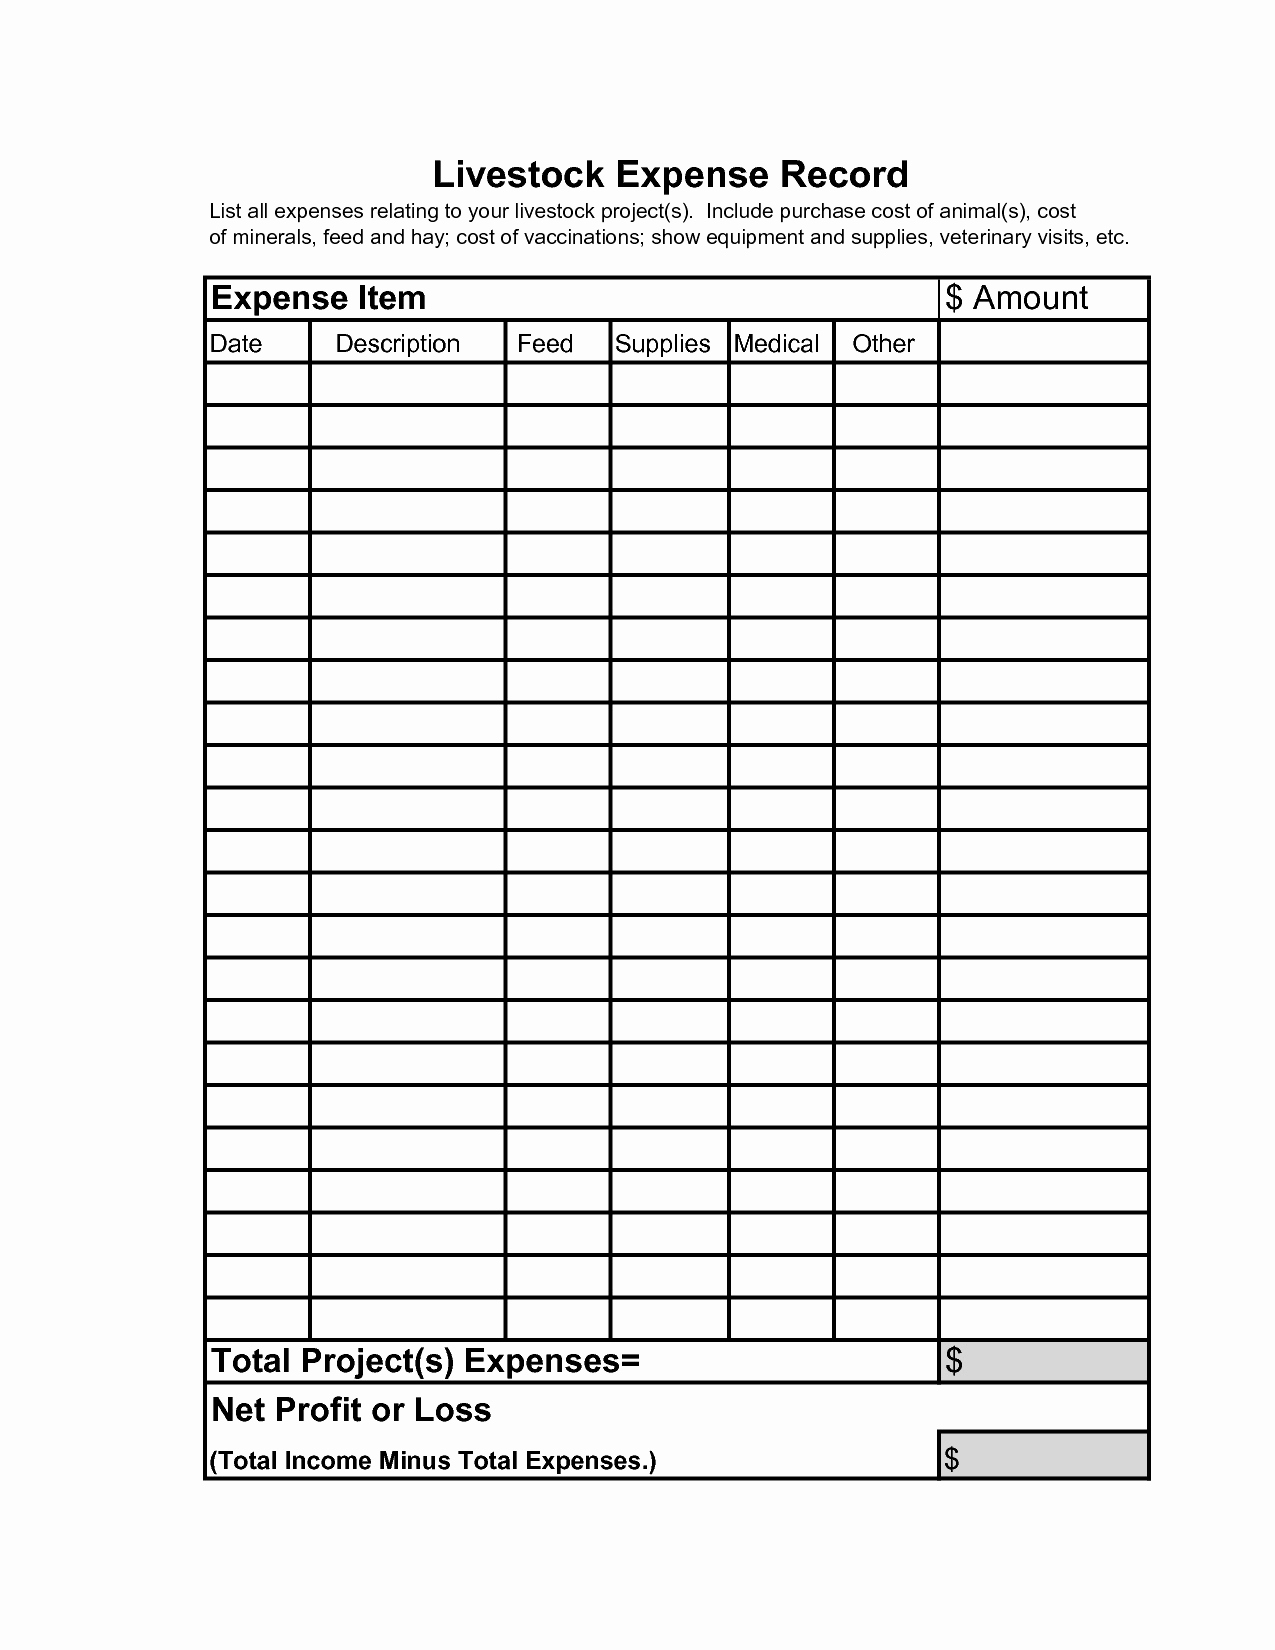 printable-cattle-record-keeping-forms-printable-blank-world